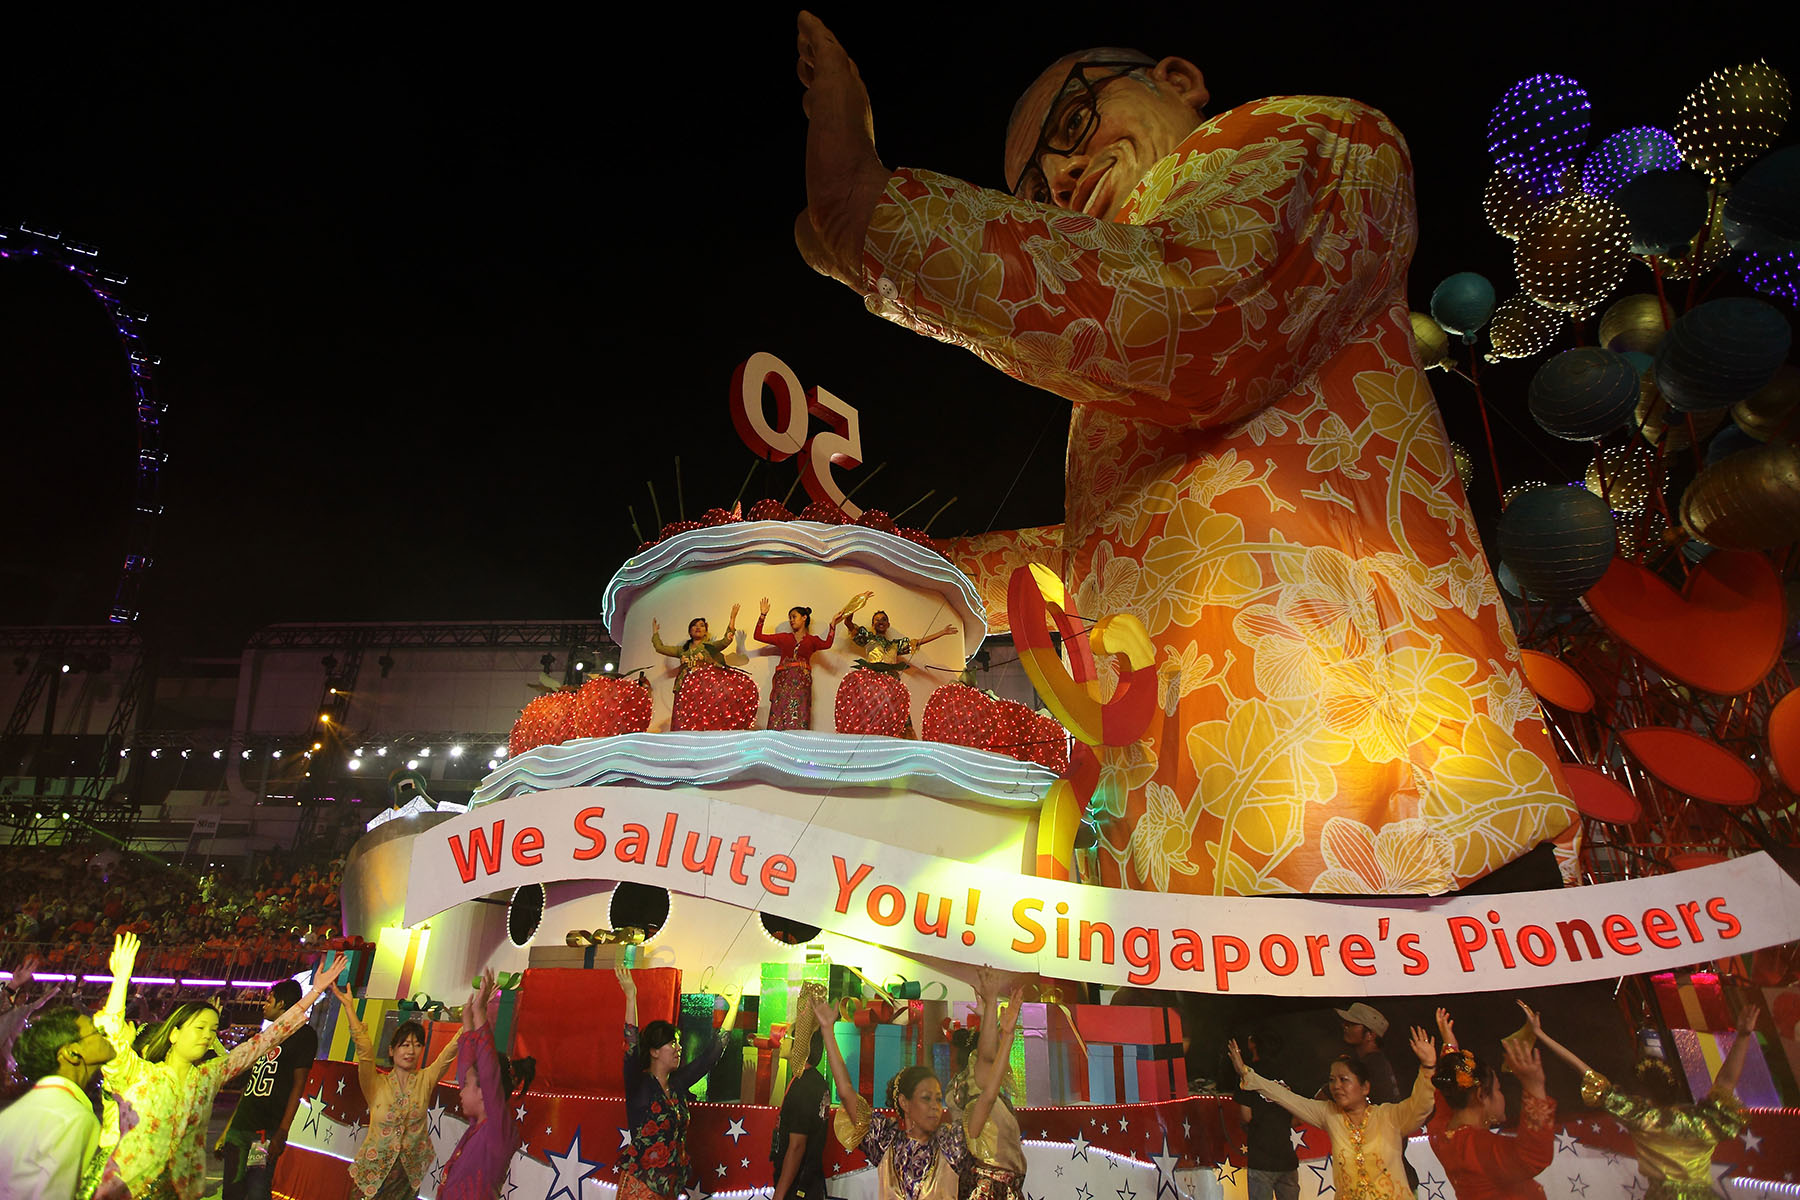 Dancers, performers, floats, and a huge audience celebrate Singapore's 50th anniversary of independence.